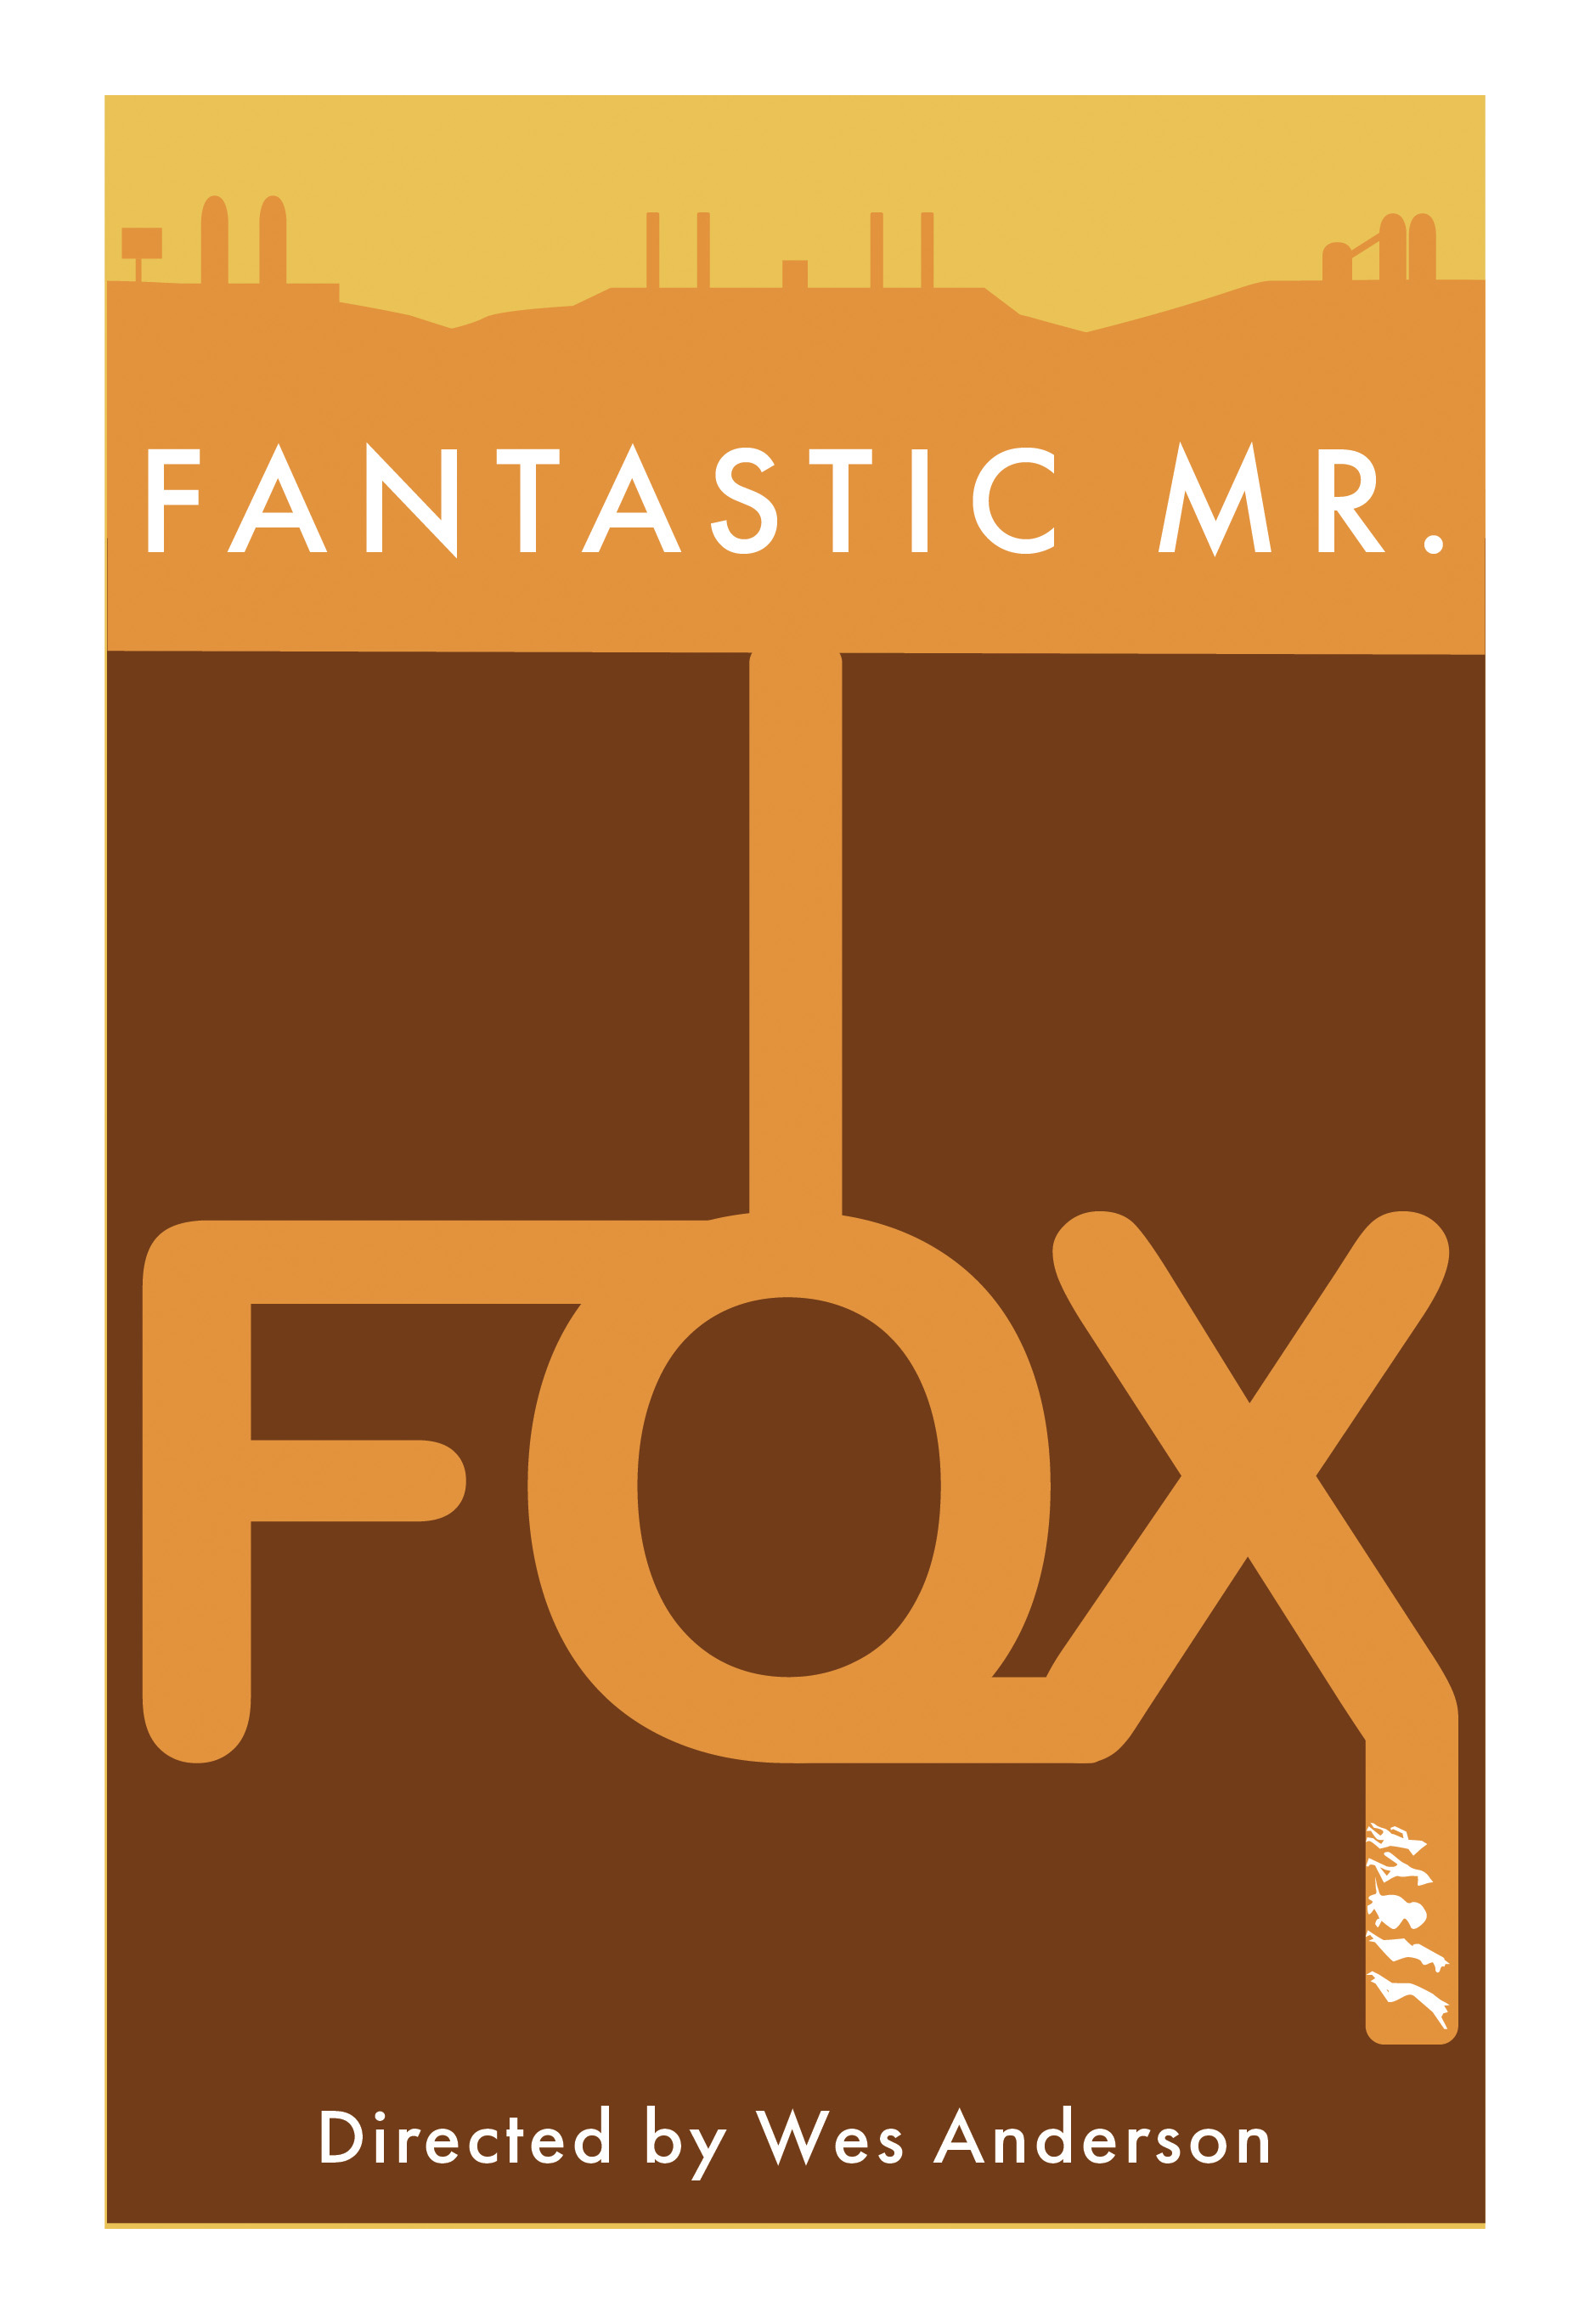 A poster of the film 'TFantastic Mr. Fox' with the letters composing the word fox depicting the tunnel scen from the movie.